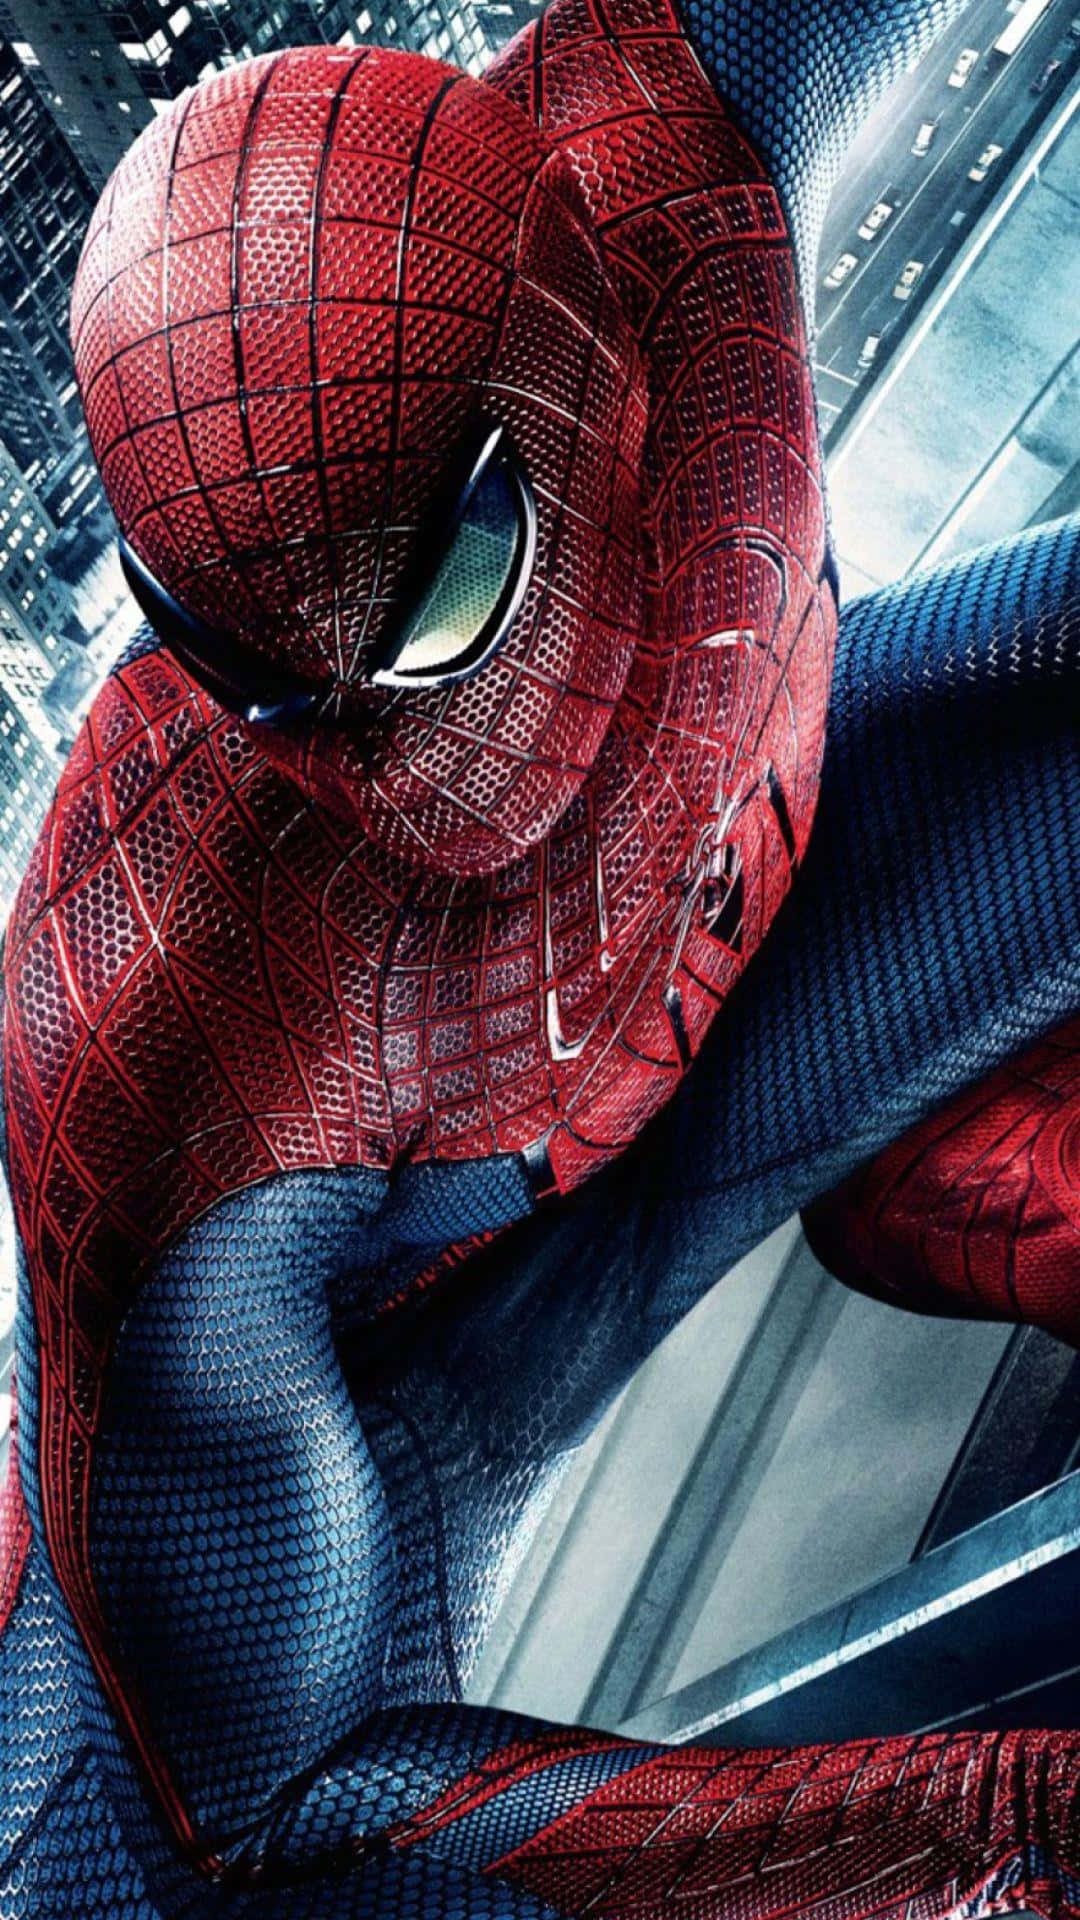 Dive into the action with this stunning wallpaper featuring the Amazing Spider-Man for your iPhone. Wallpaper